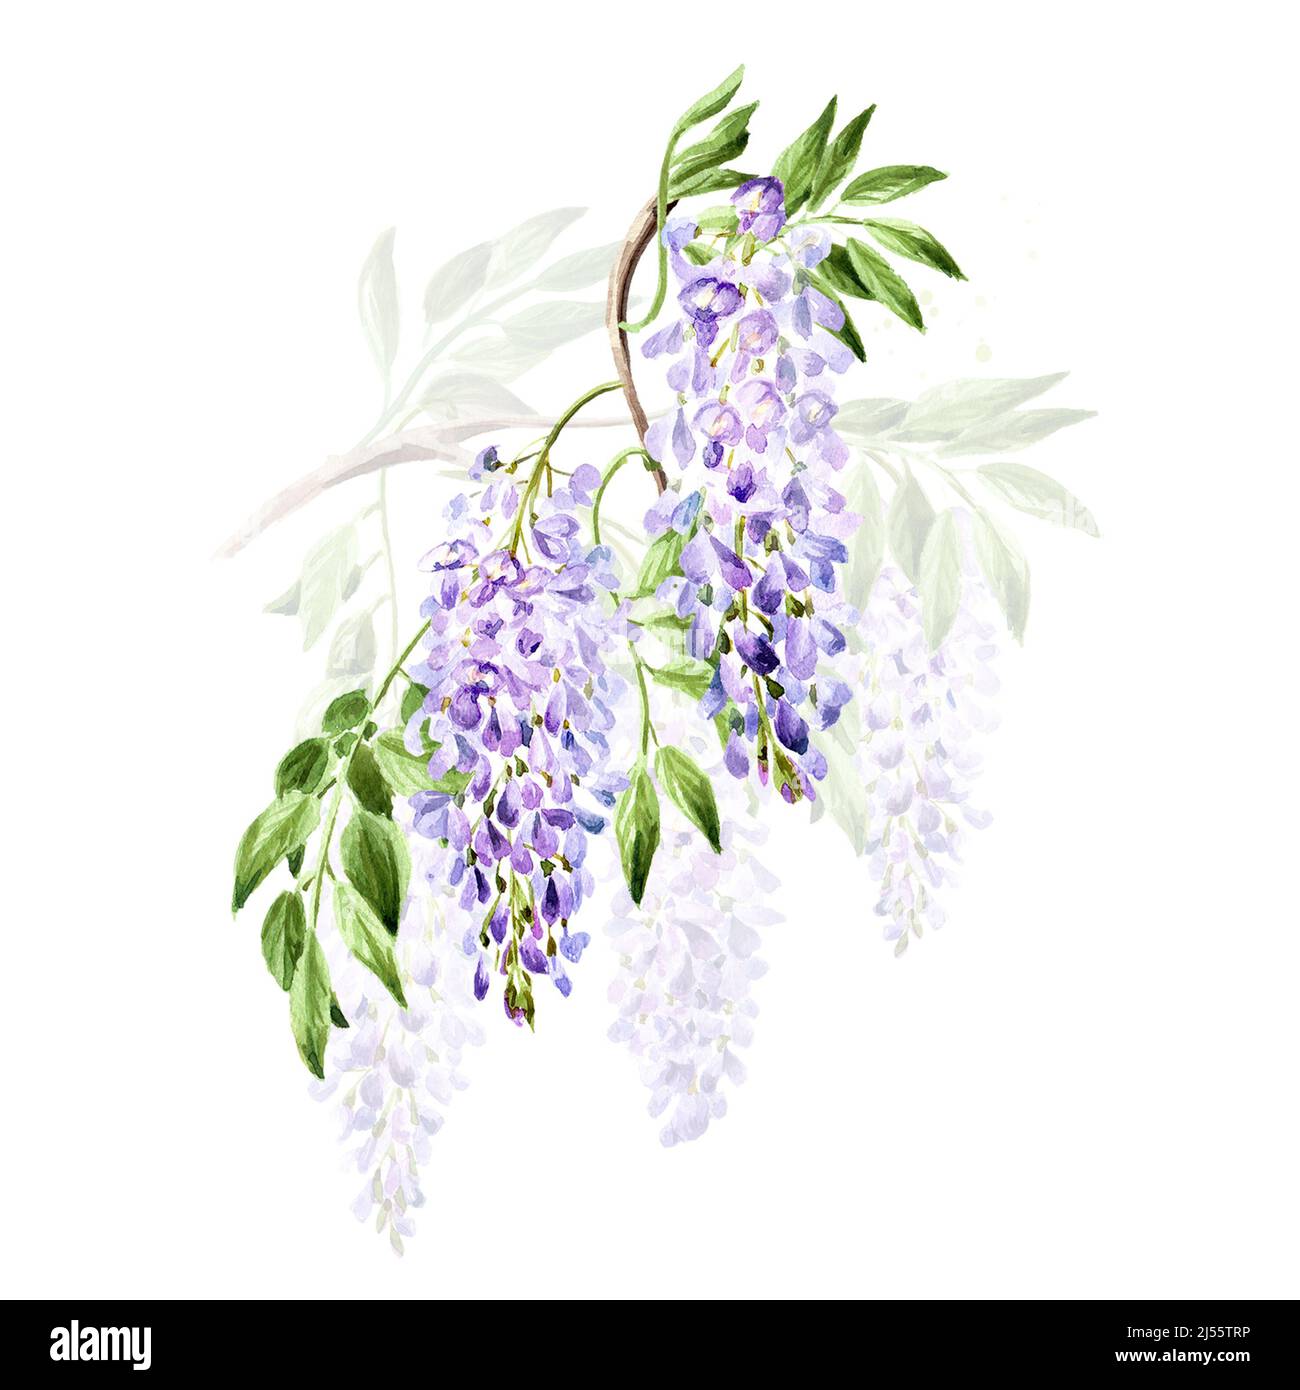 Wisteria flower, save the date card element. Hand drawn watercolor  illustration isolated on white background Stock Photo